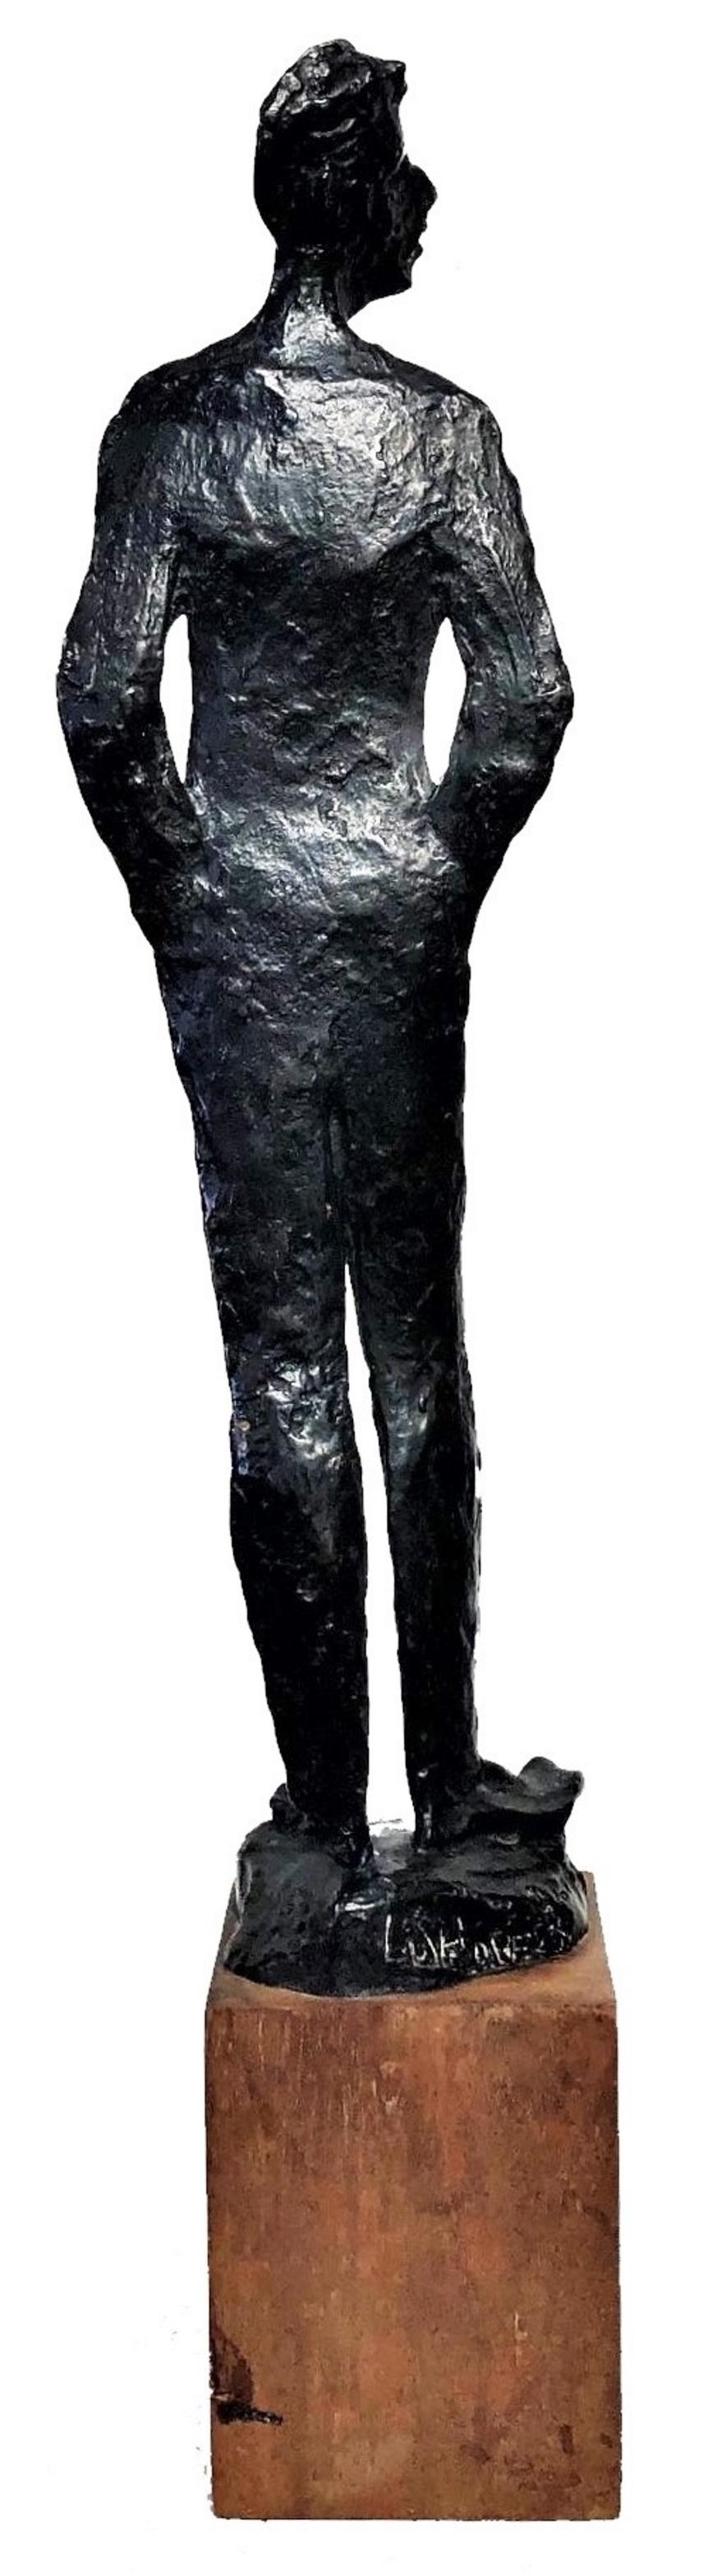 Mid-20th Century Modernist Bronze Sculpture of a Standing Man by L. Shore, 1953 For Sale